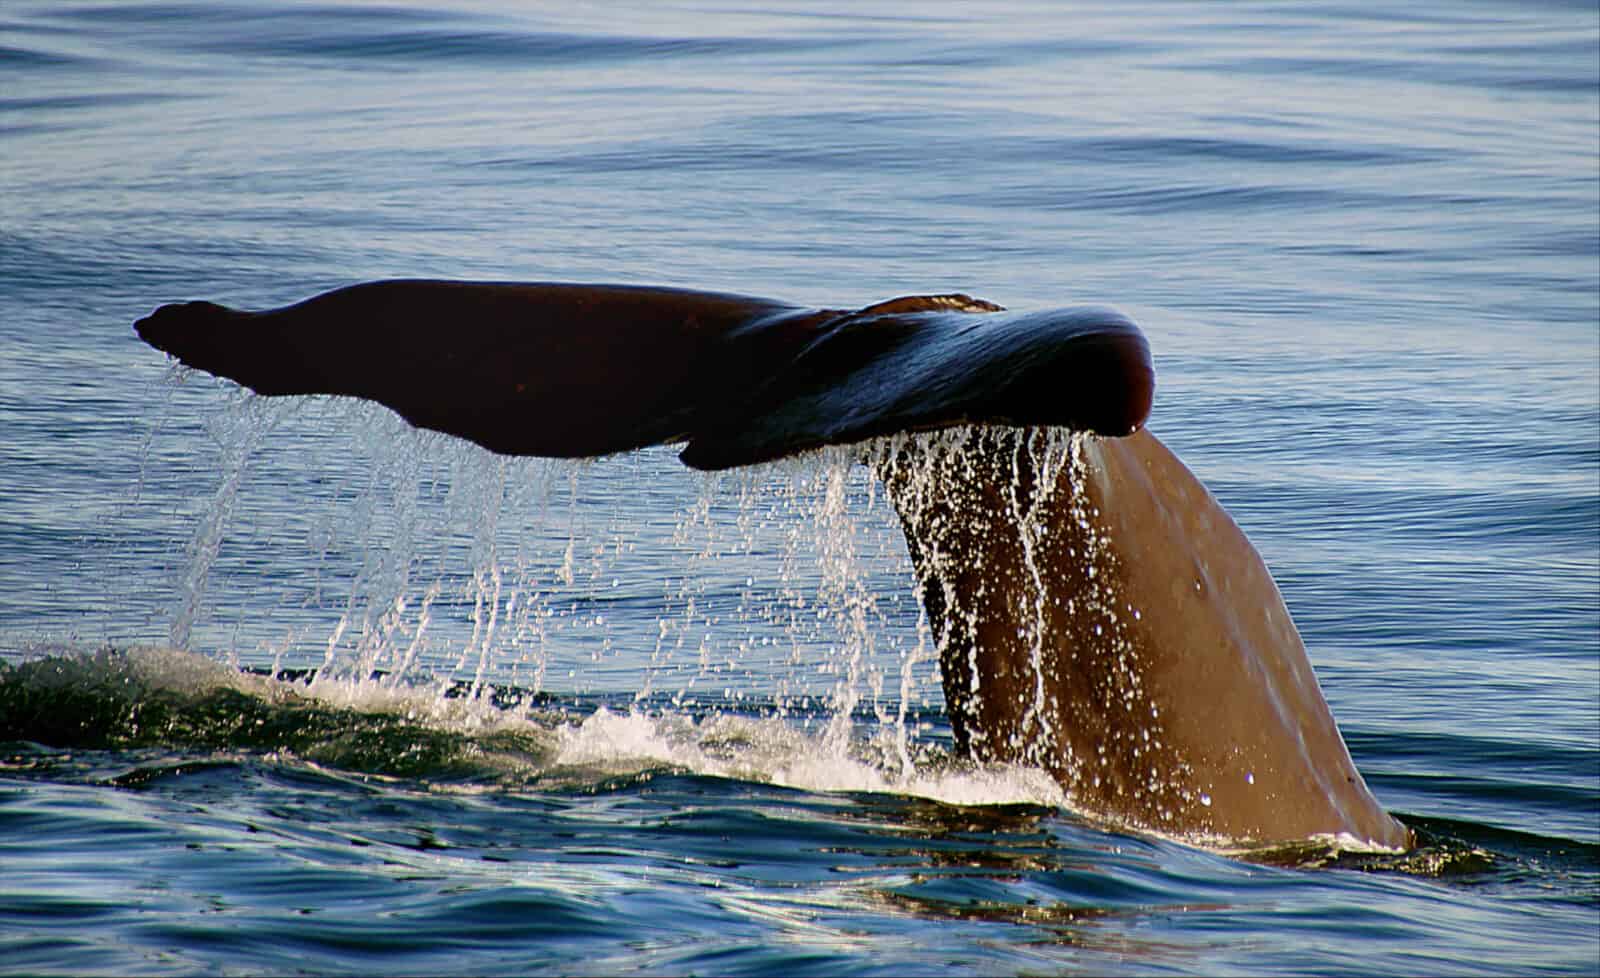 A sperm whale's tale lifts in the sun as the whale dives. Public domain photo by Bernard Spragg of New Zealand